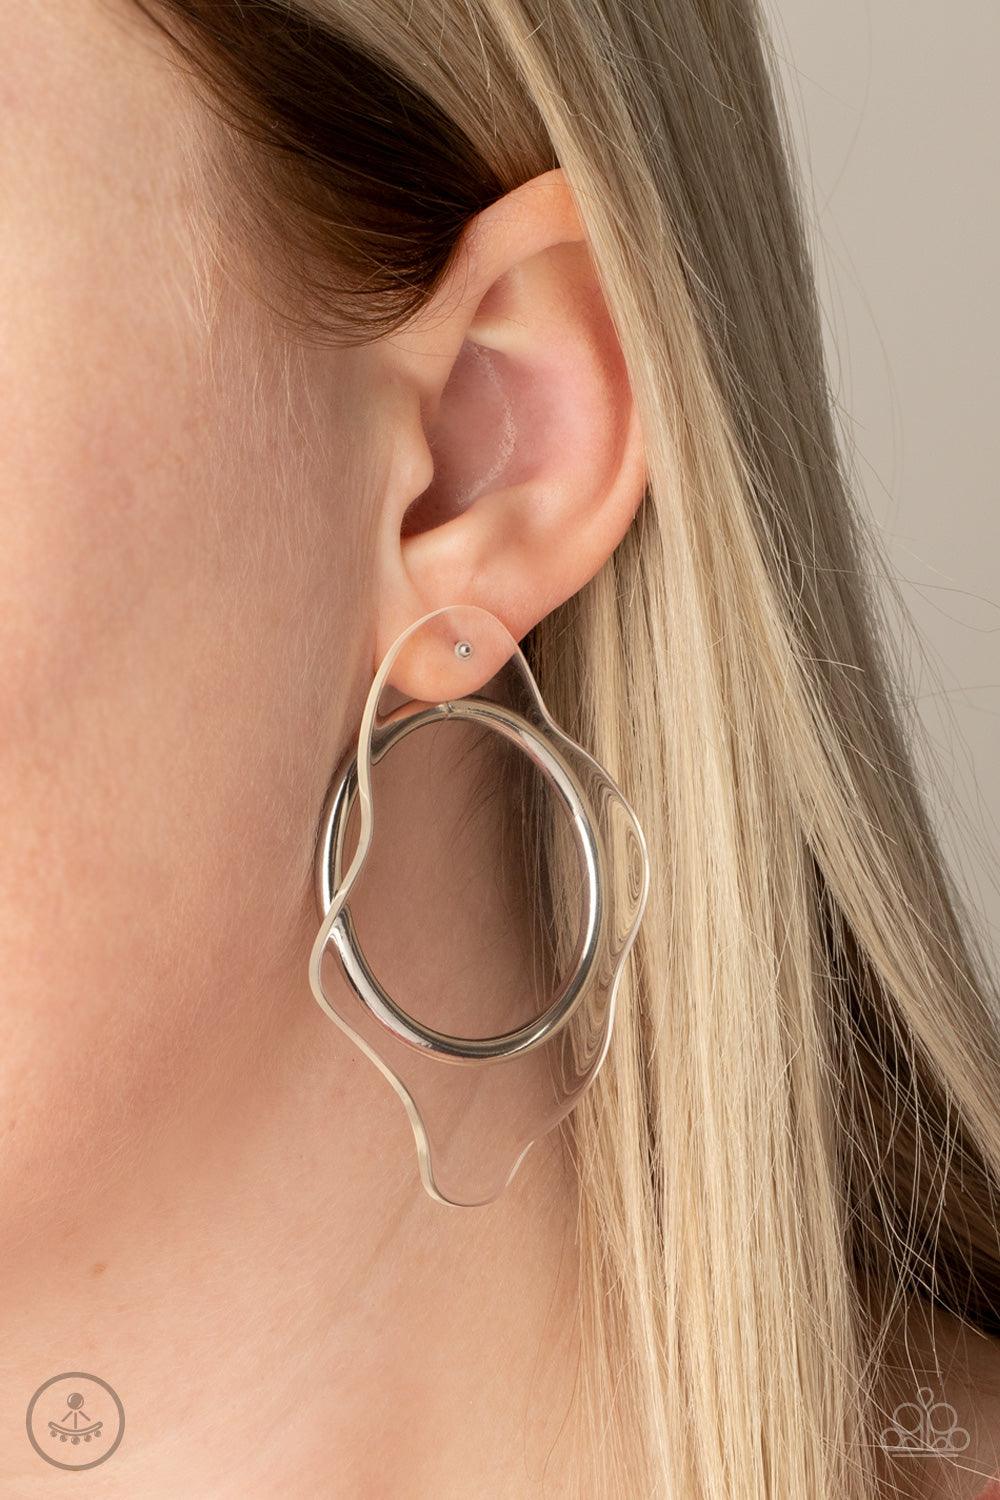 Paparazzi Accessories Clear The Way! - White A warped piece of clear acrylic attaches to a double-sided post, while an oversized silver hoop peeks out beneath the ear for a bold look. Earring attaches to a standard post fitting. Sold as one pair of double